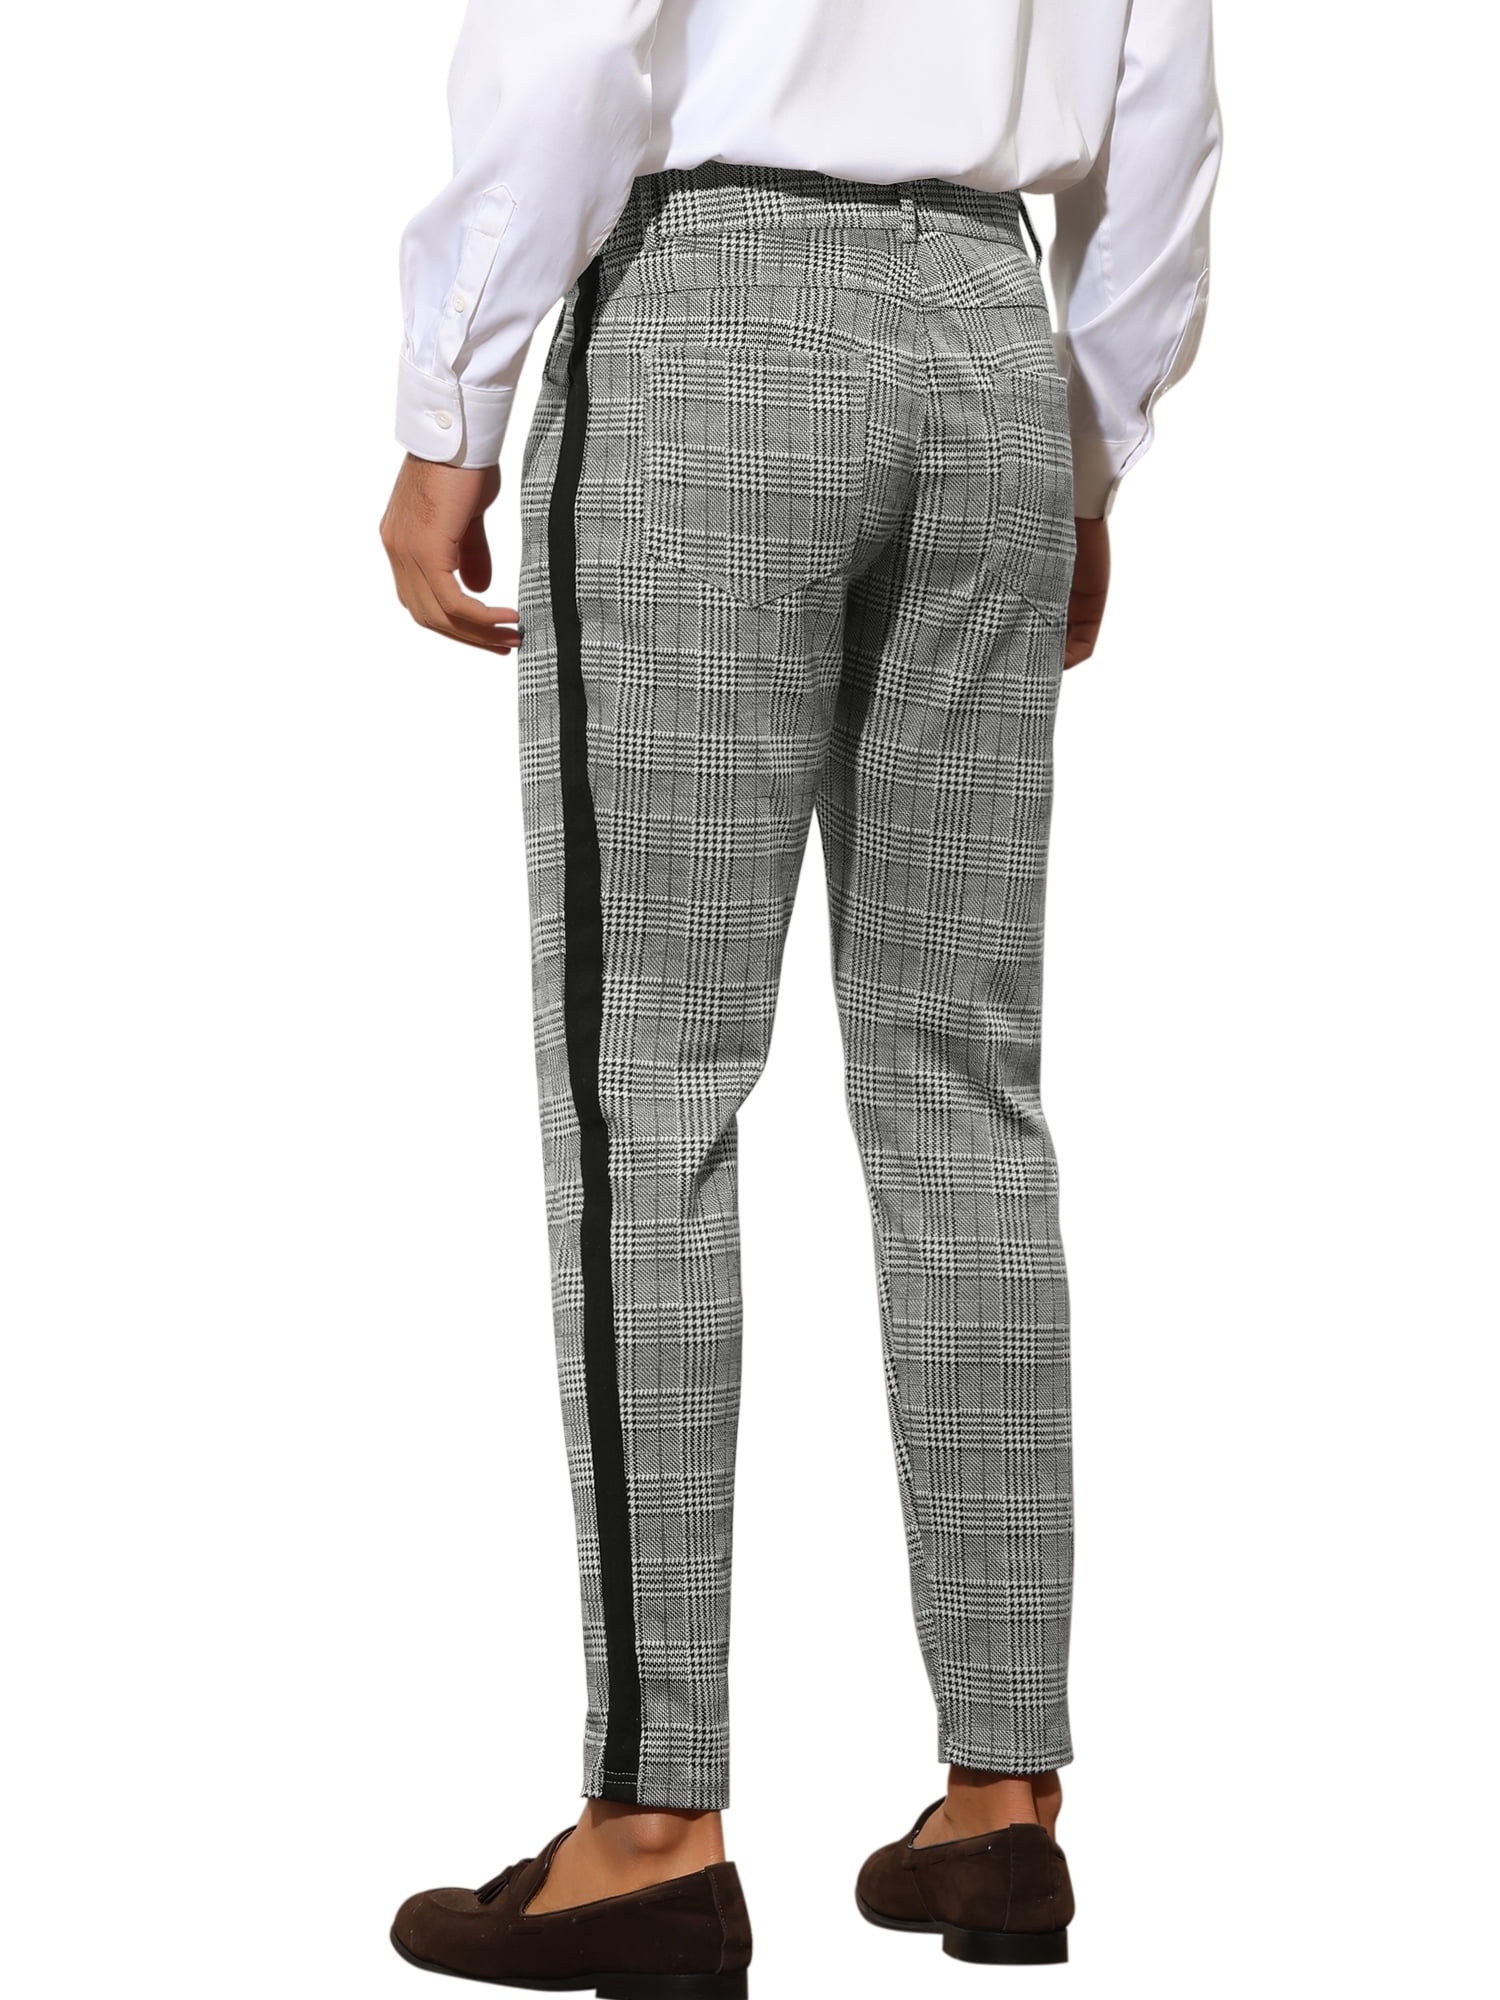 Blue Slim Fit Plaid Pants for Men by GentWith.com | Worldwide Shipping